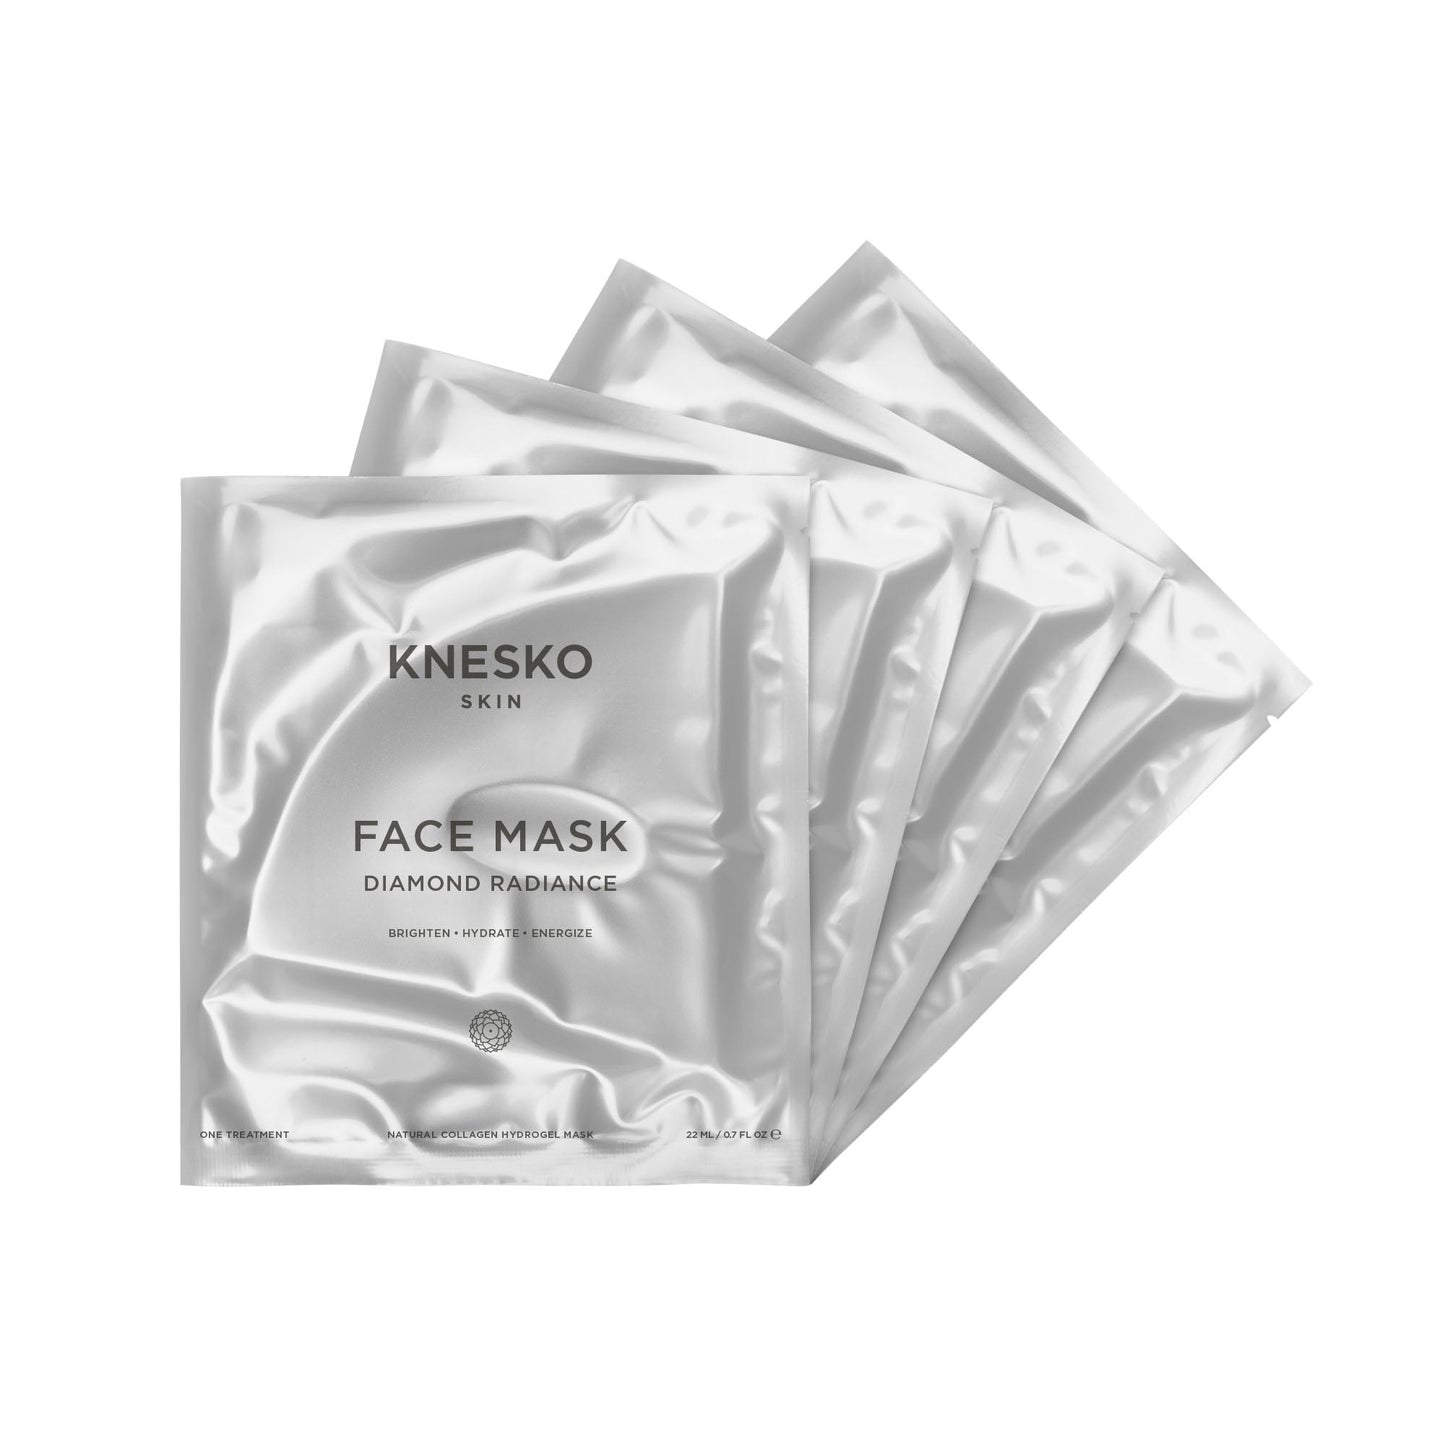 Buy Online Best Diamond Face Masks - 4 Treatments | Buy innovative clinical skincare products - TOPBODY